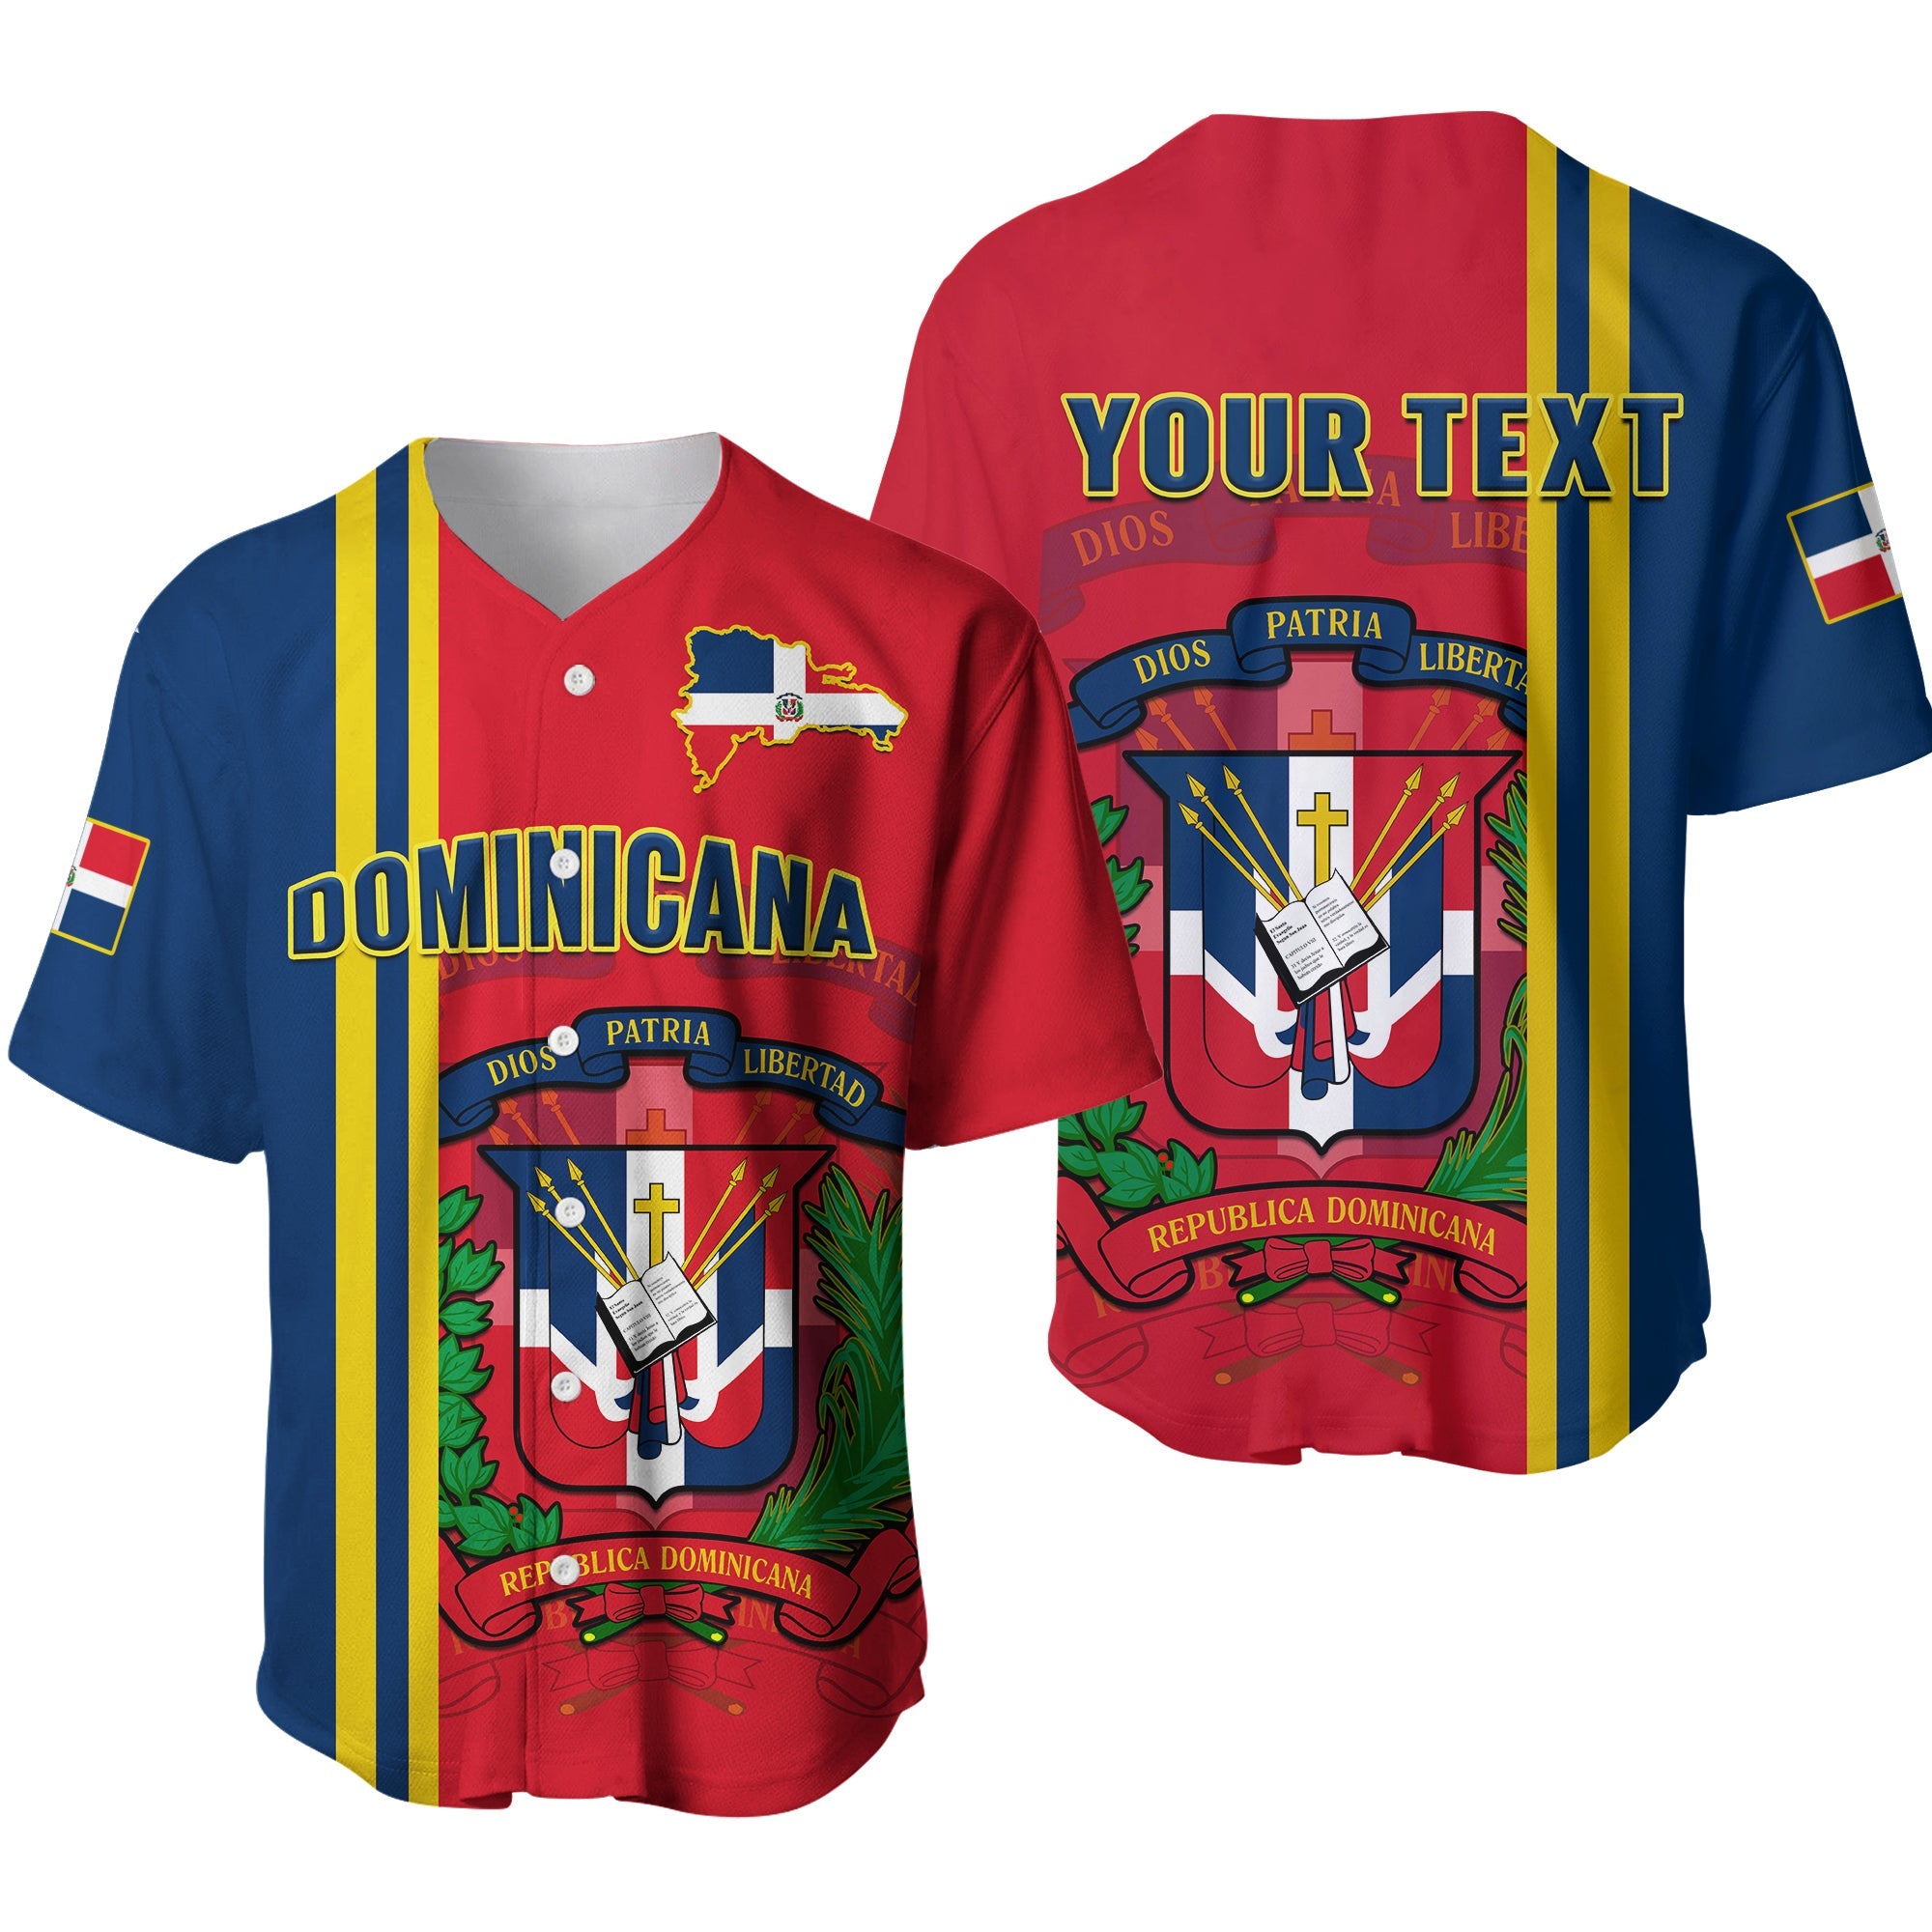 custom-personalised-dominican-republic-baseball-jersey-happy-179-years-of-independence-ver01